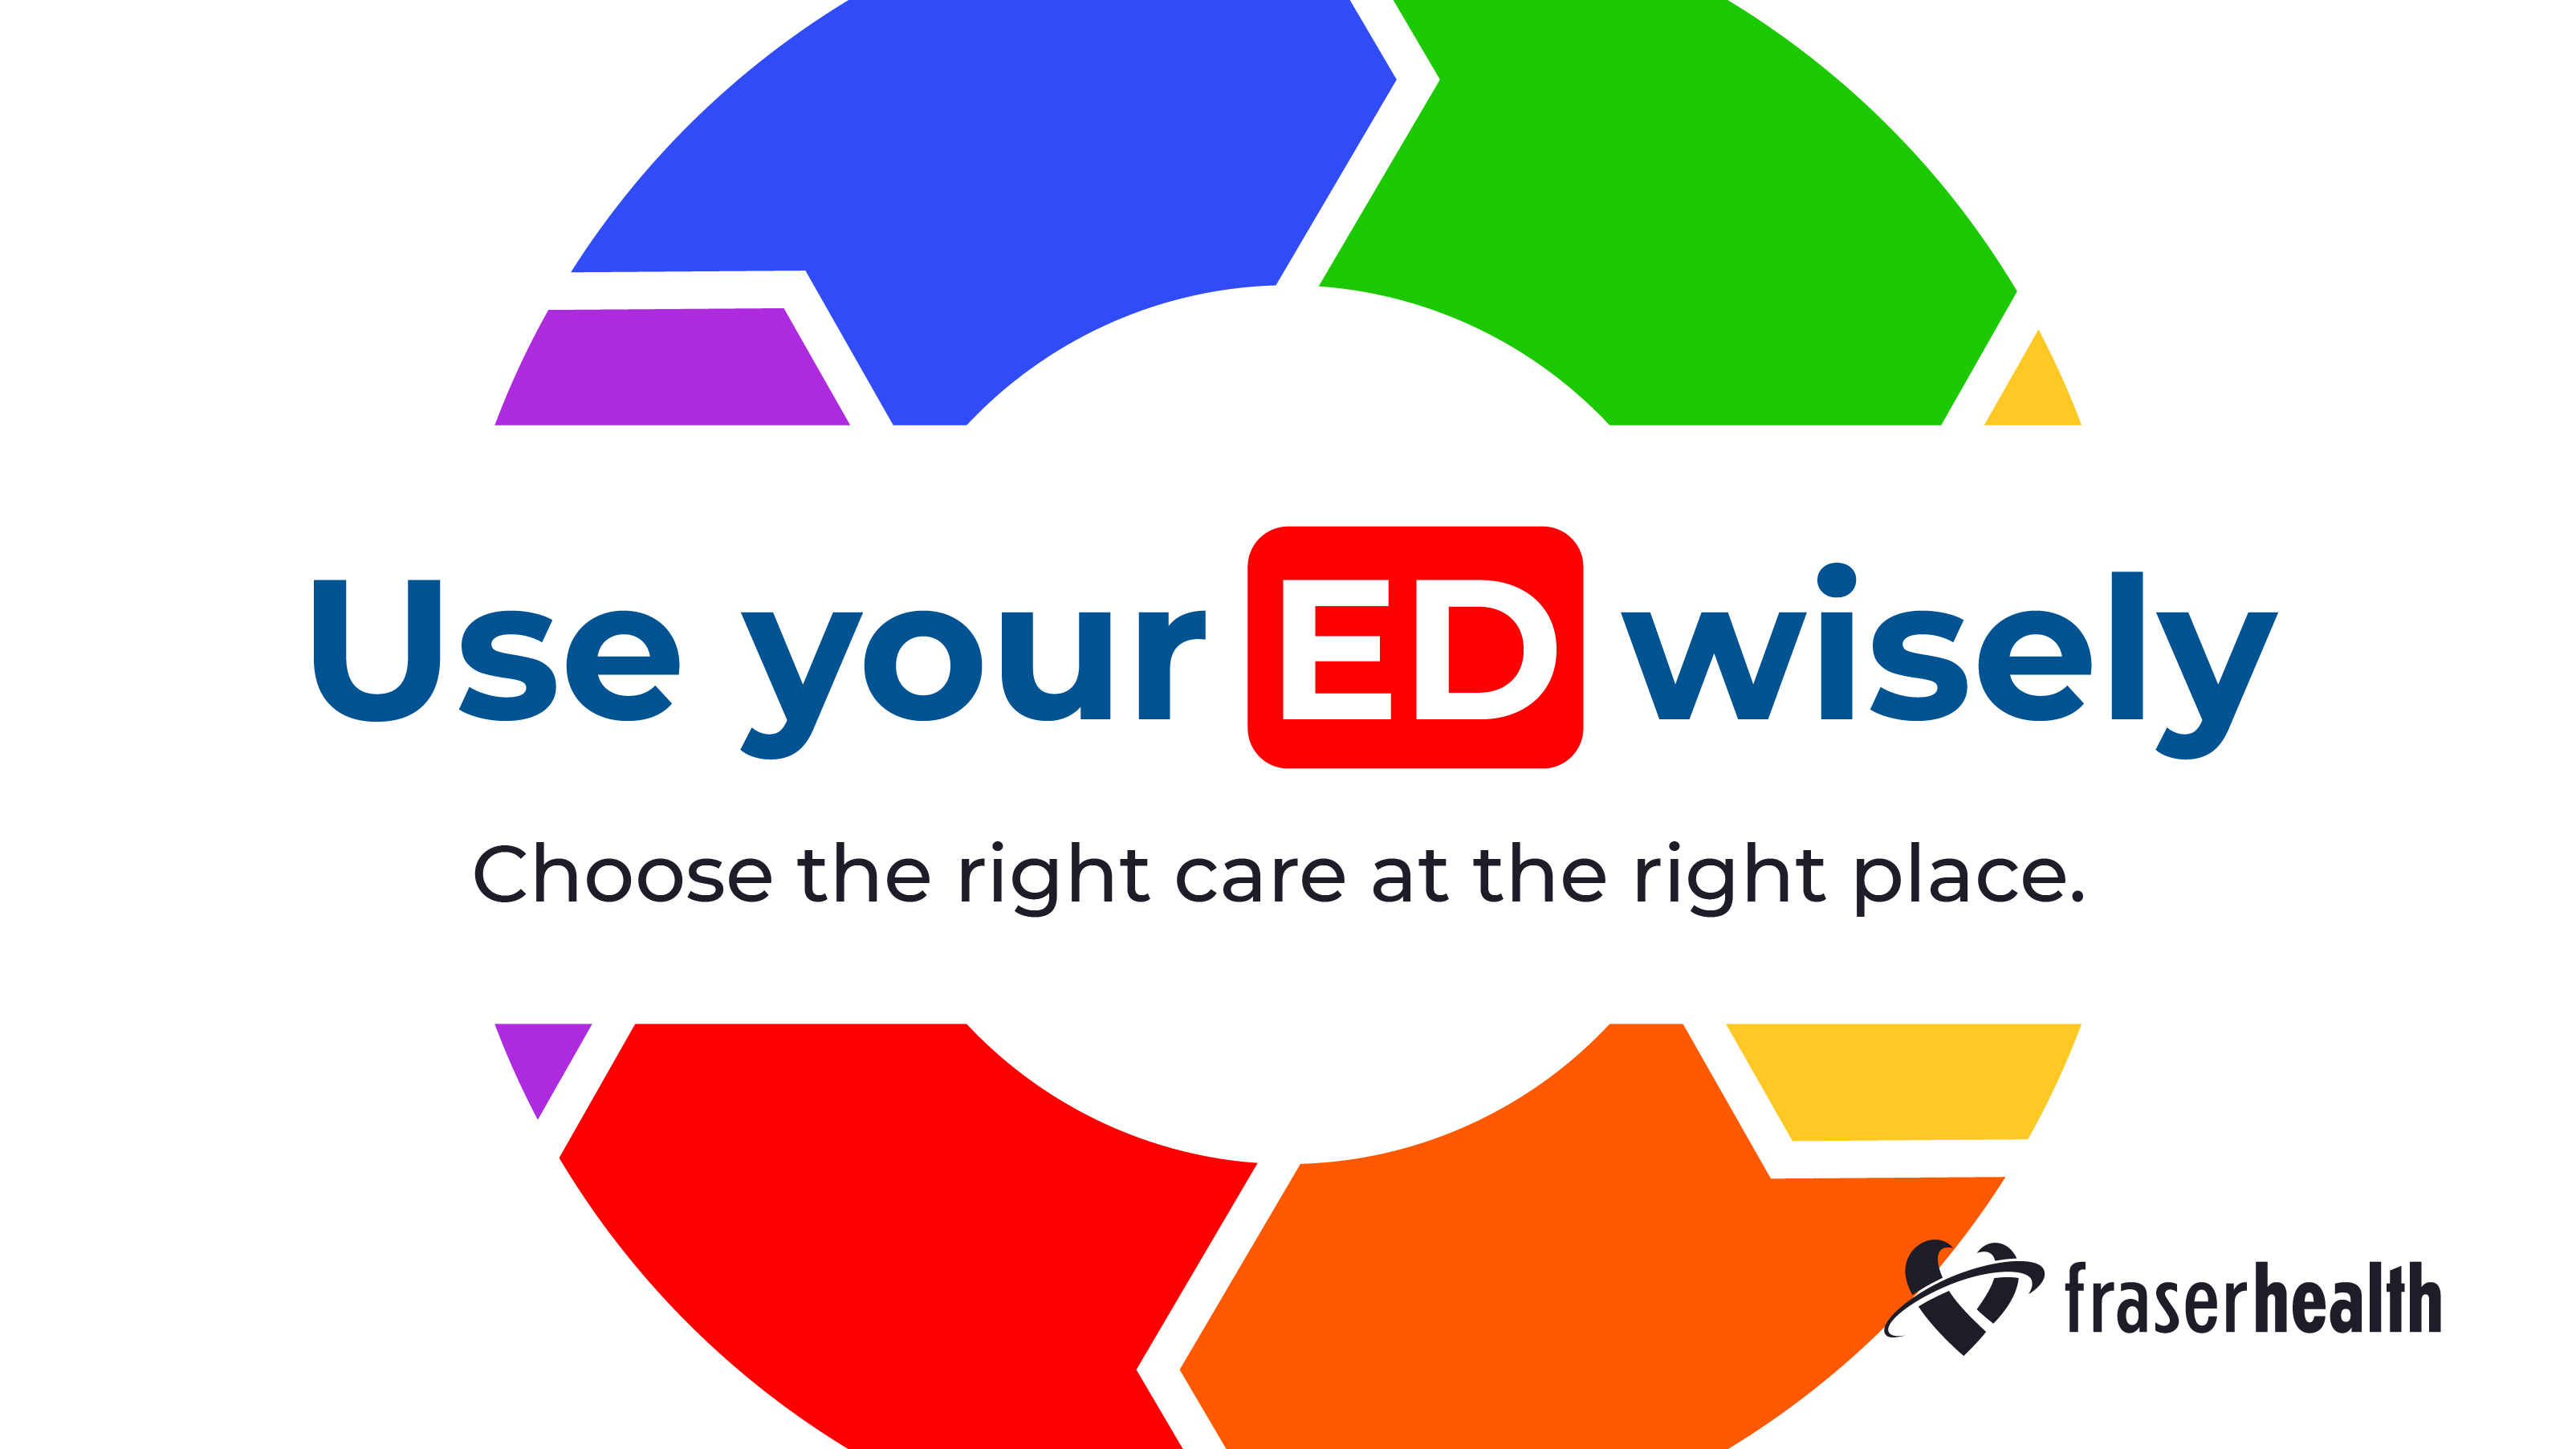 Use your ED wisely